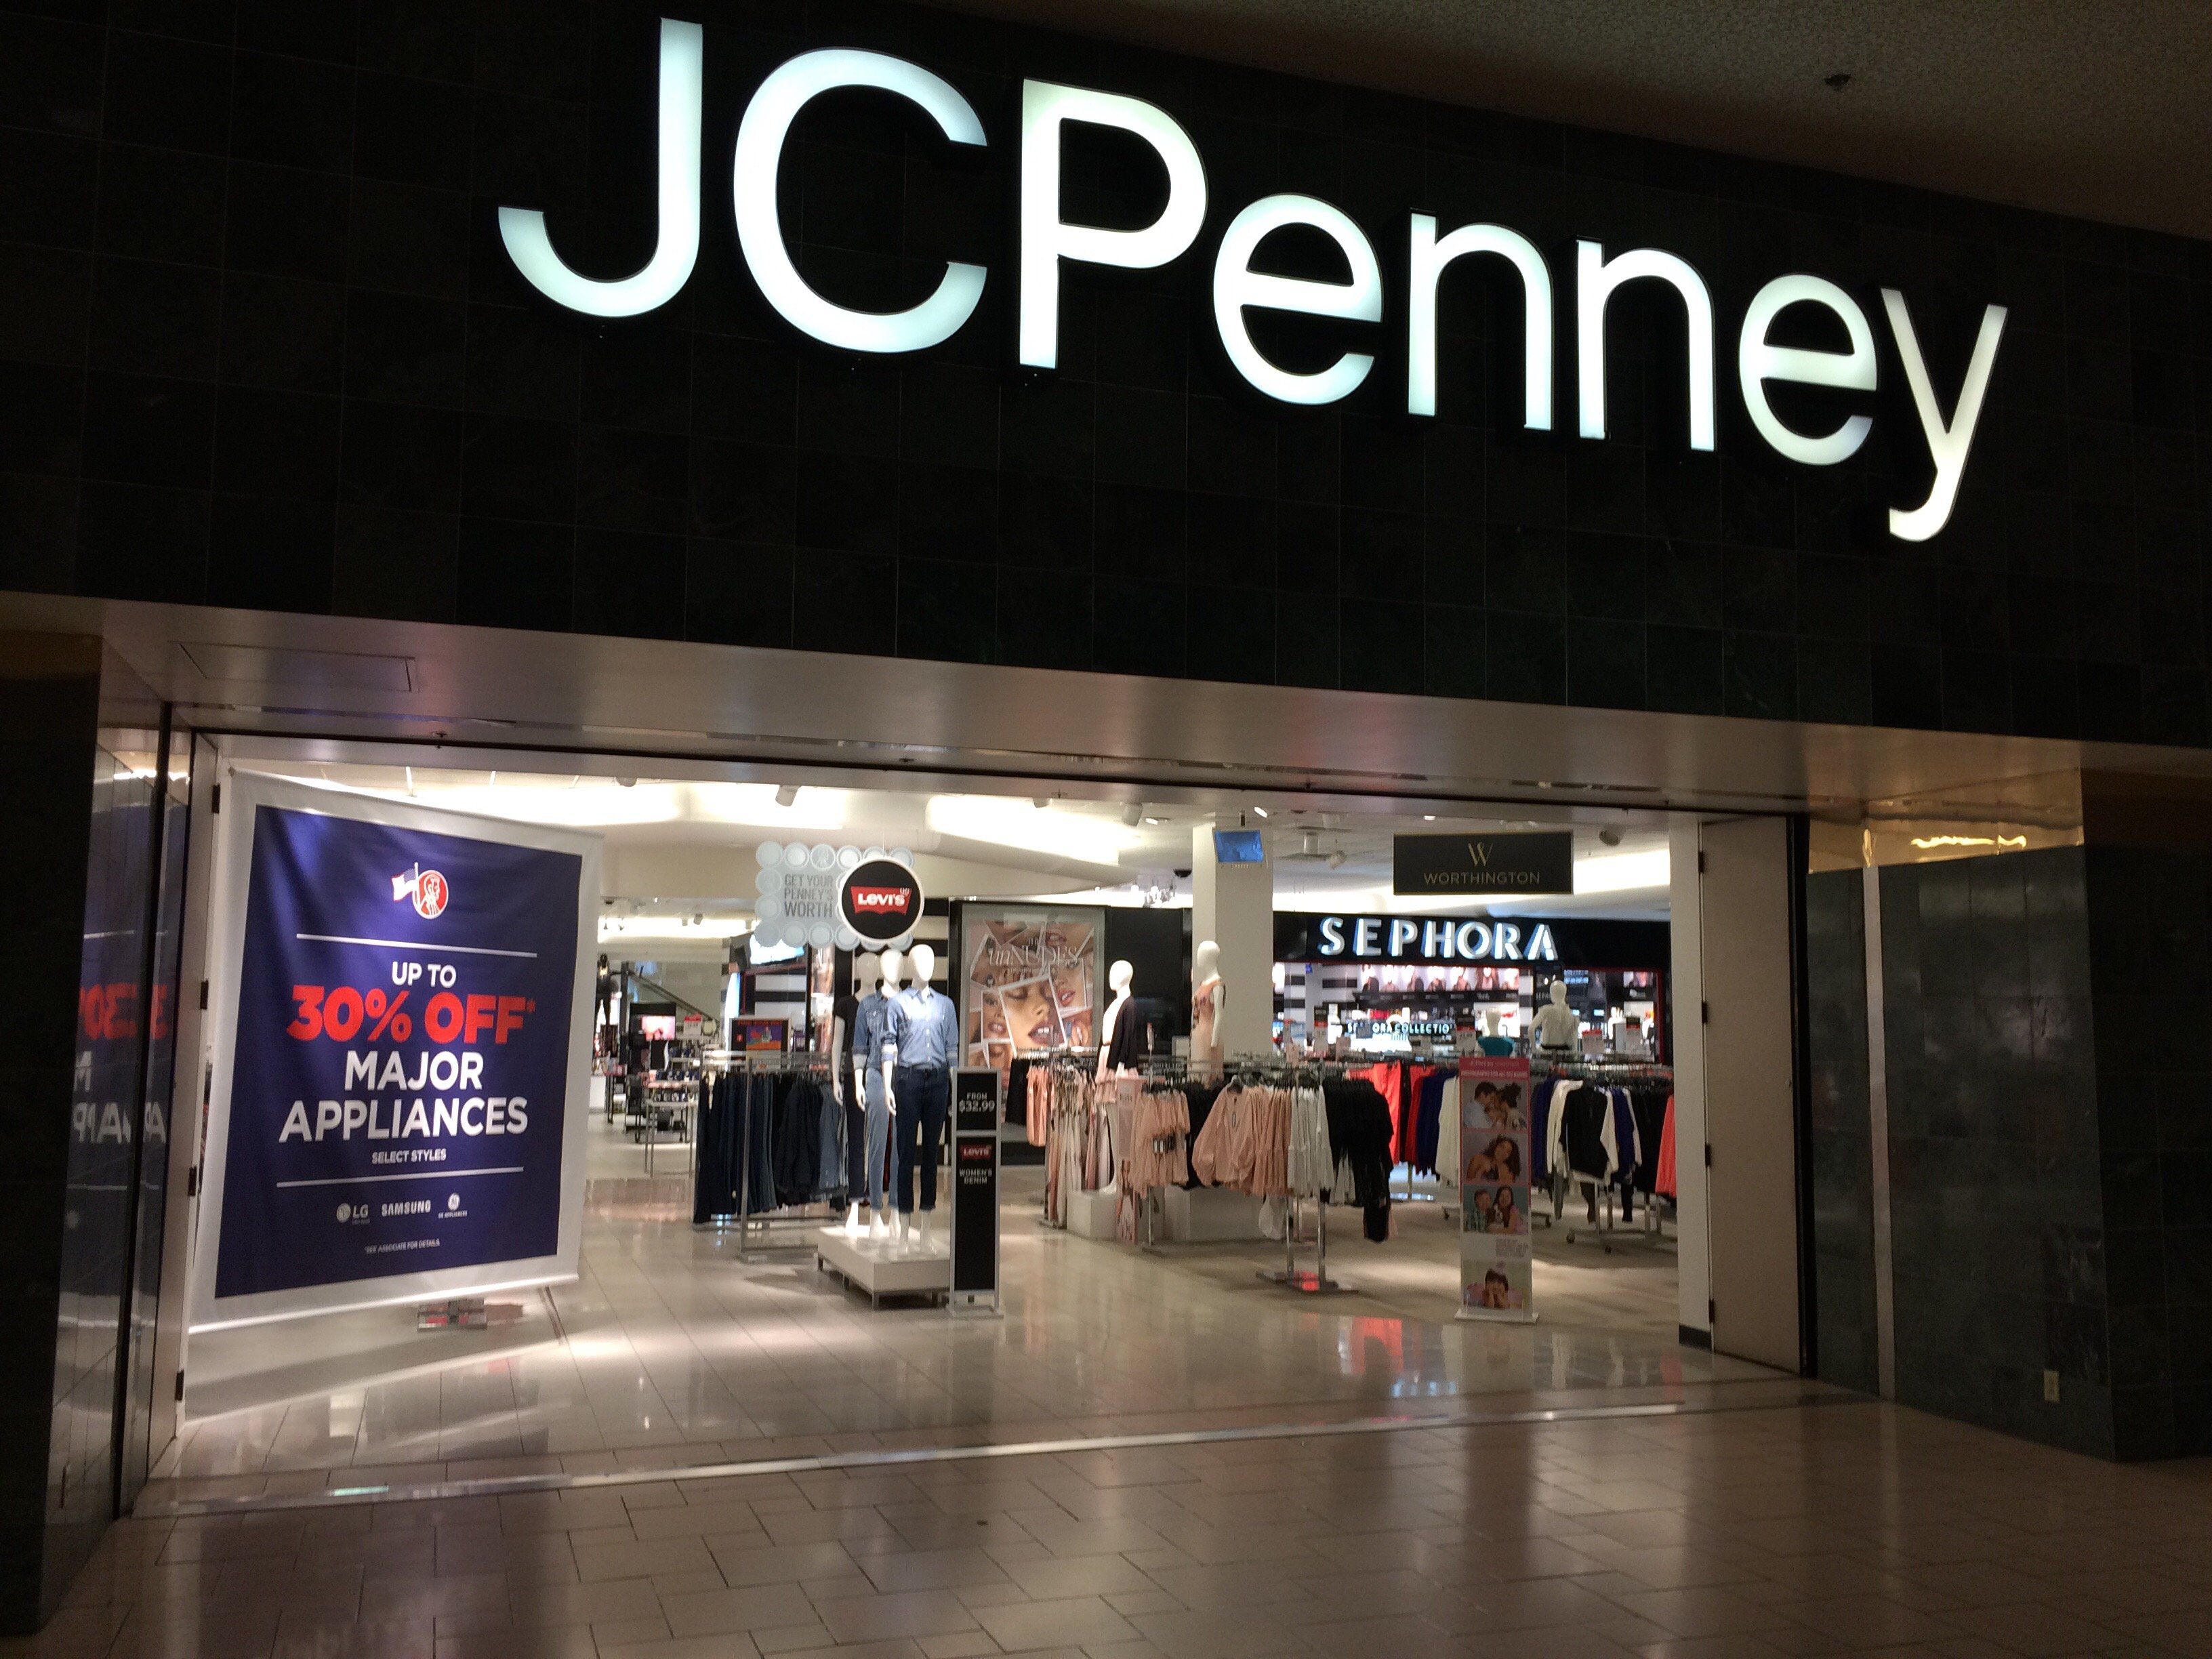 JCPenney liquidation sales at 136 stores: Here are best online